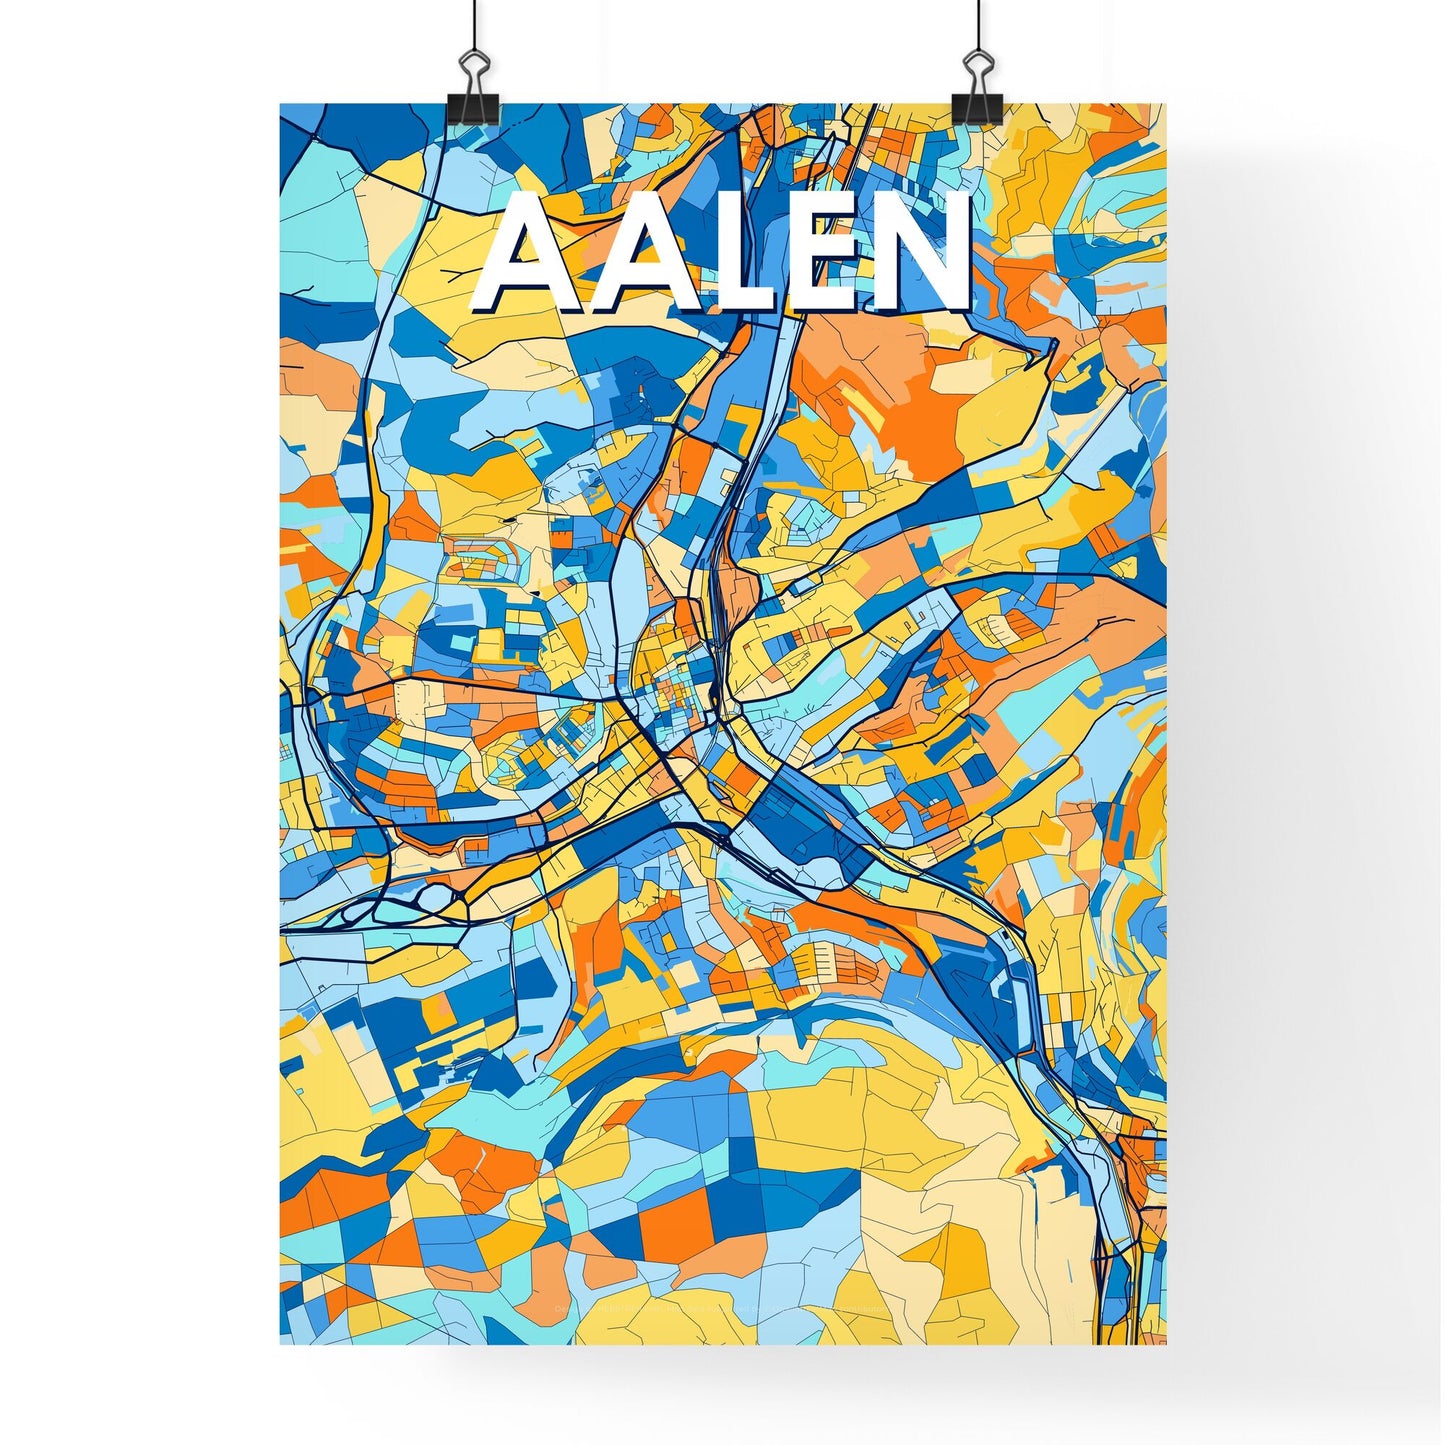 AALEN GERMANY Vibrant Colorful Art Map Poster Blue Orange